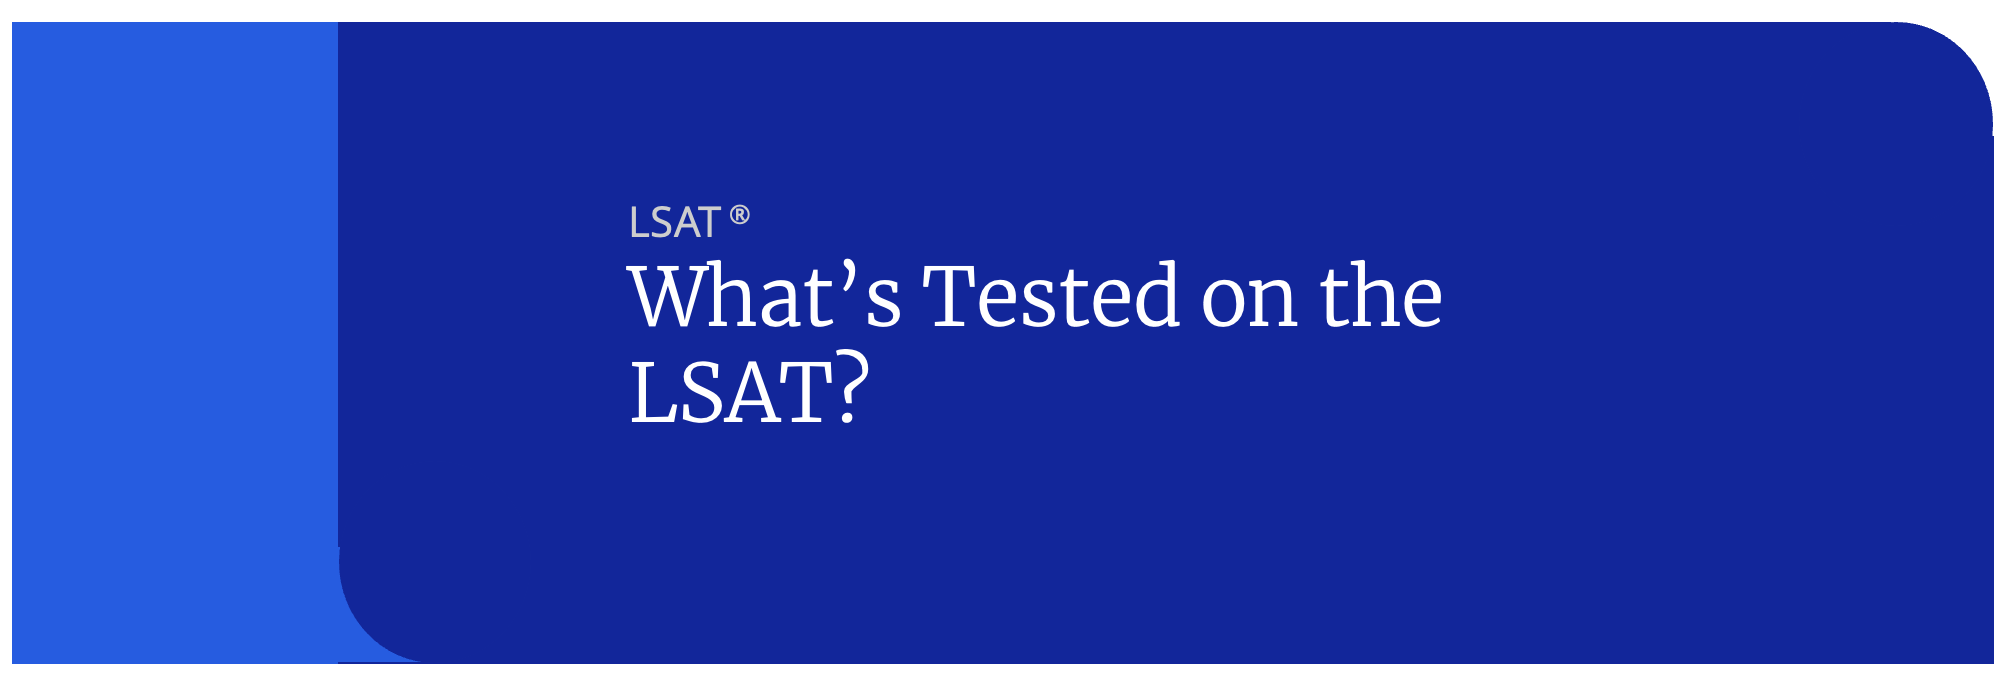 what is tested on the LSAT